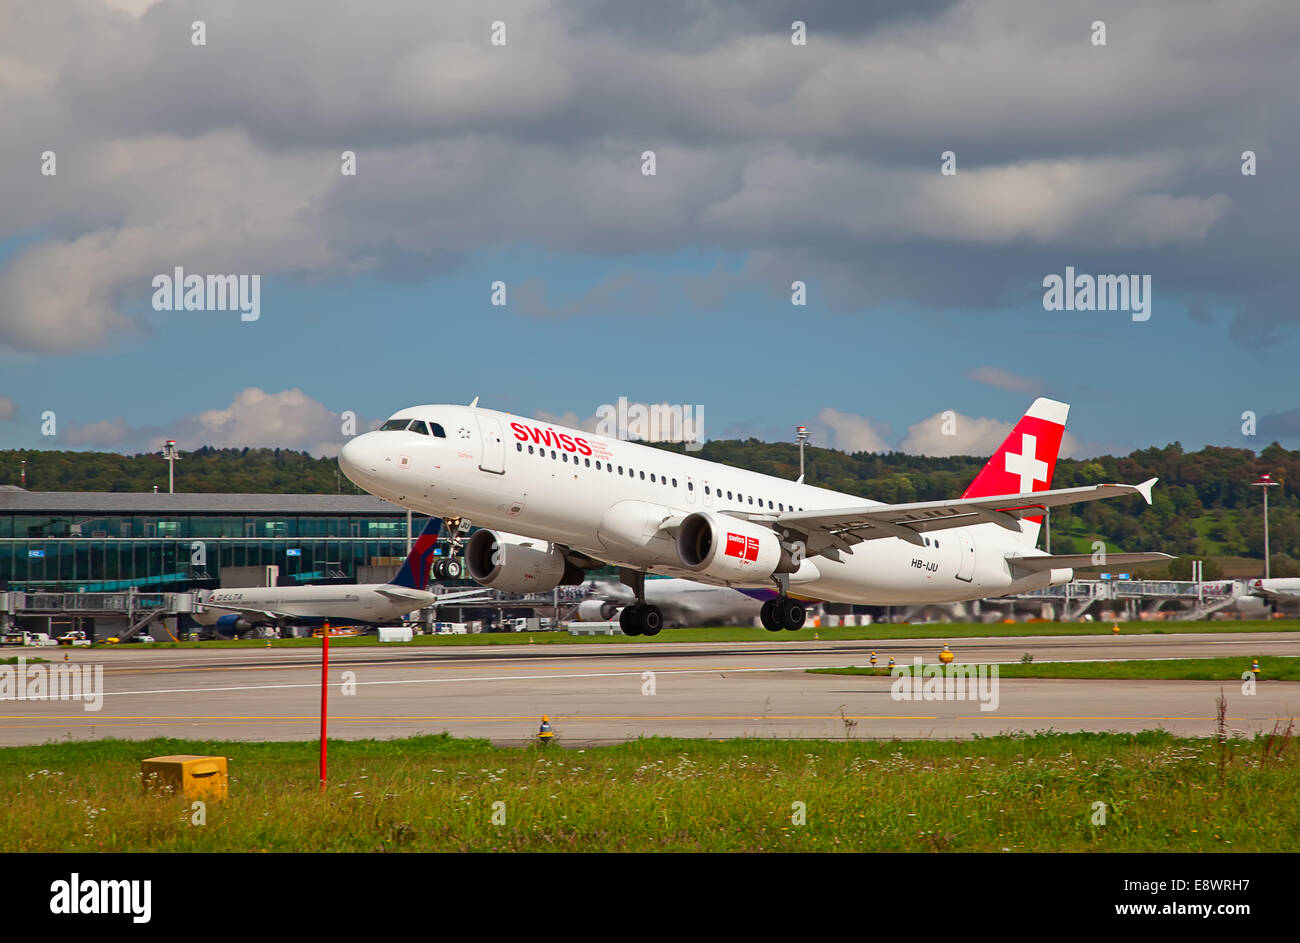 ZURICH - SEPTEMBER 21:Swiss airlines Airbus A330 taking off on September 21, 2014 in Zurich, Switzerland. Zurich International A Stock Photo